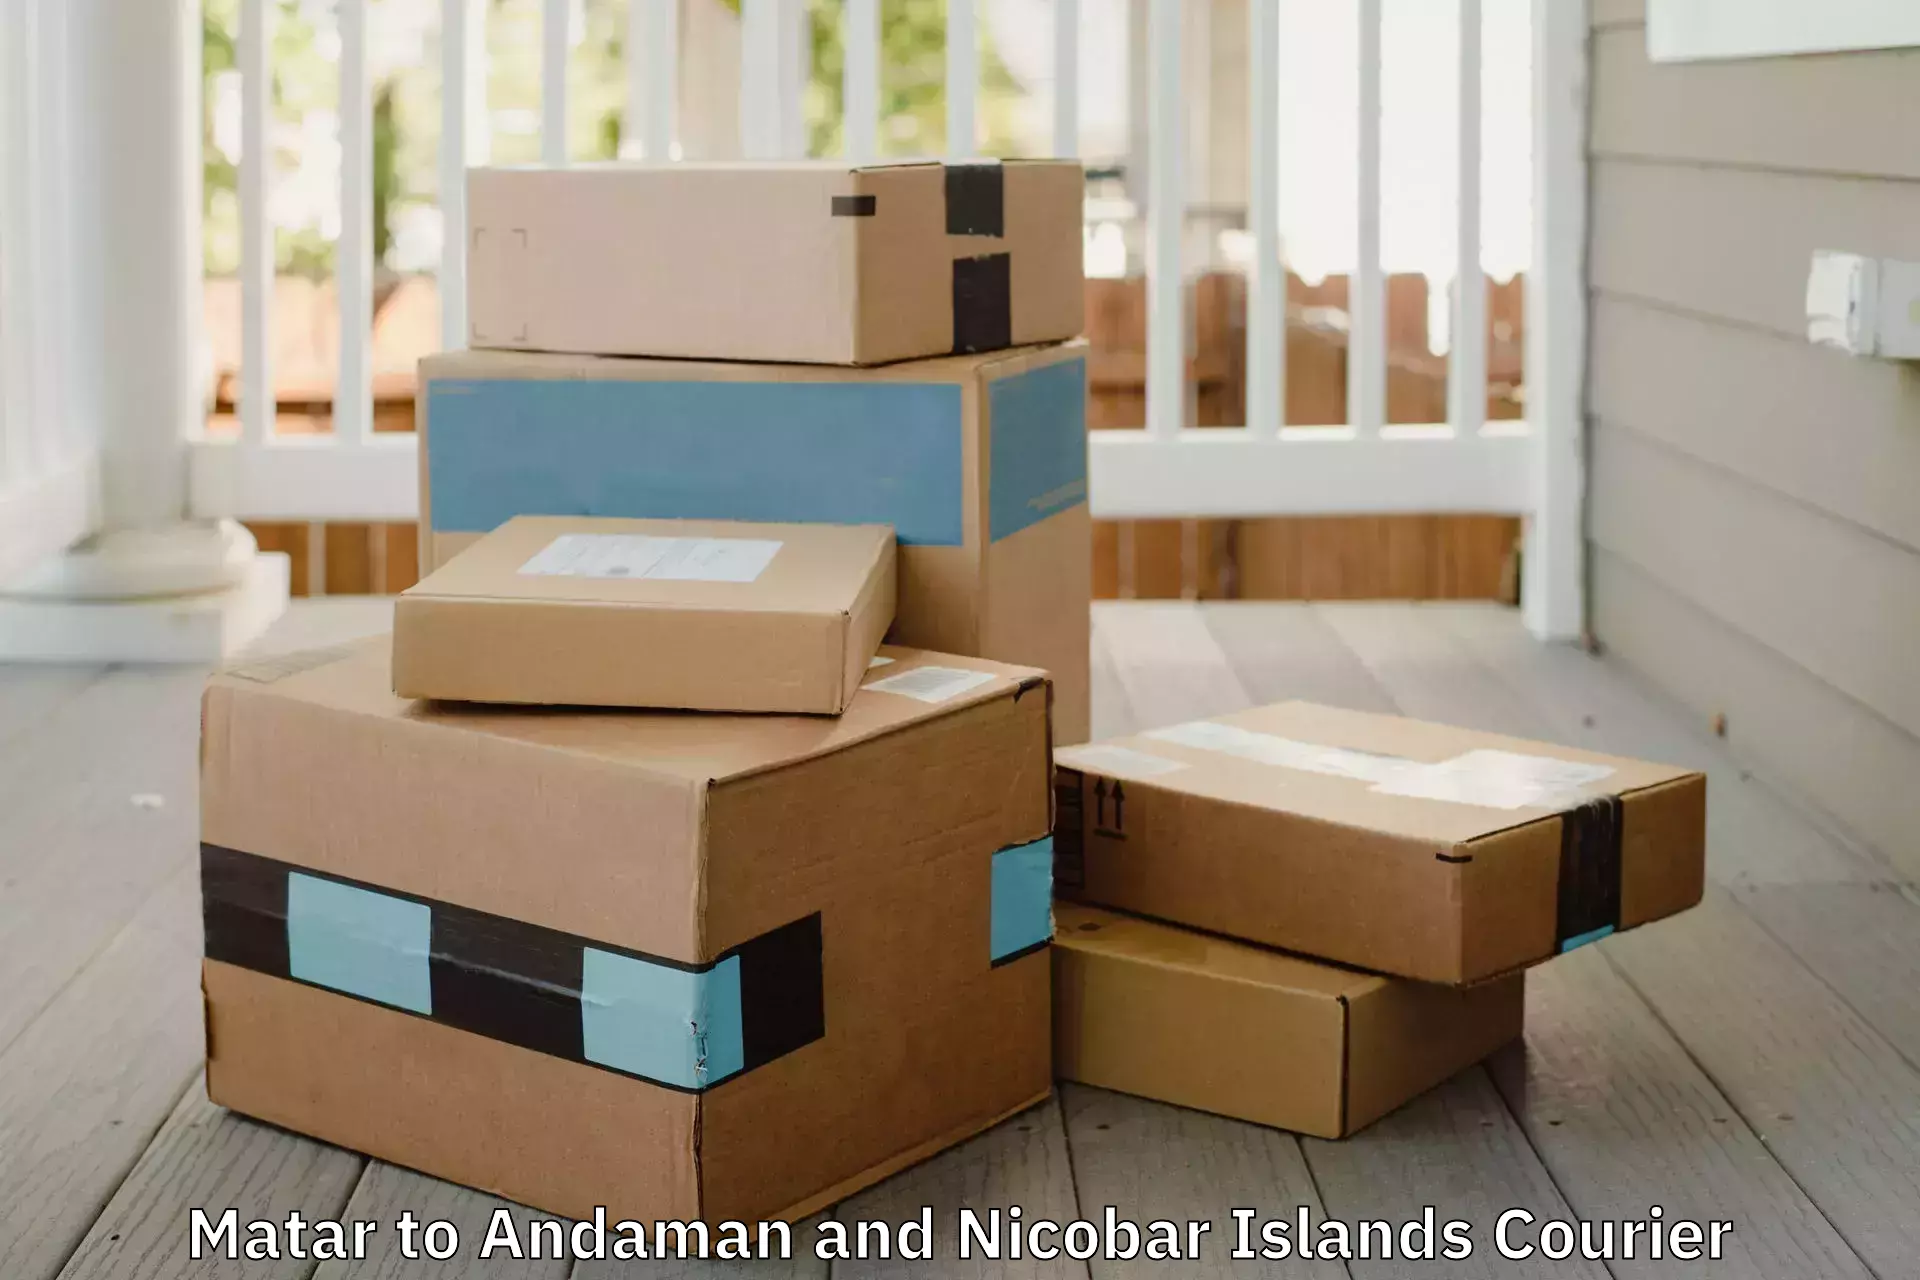 Furniture delivery service Matar to Andaman and Nicobar Islands